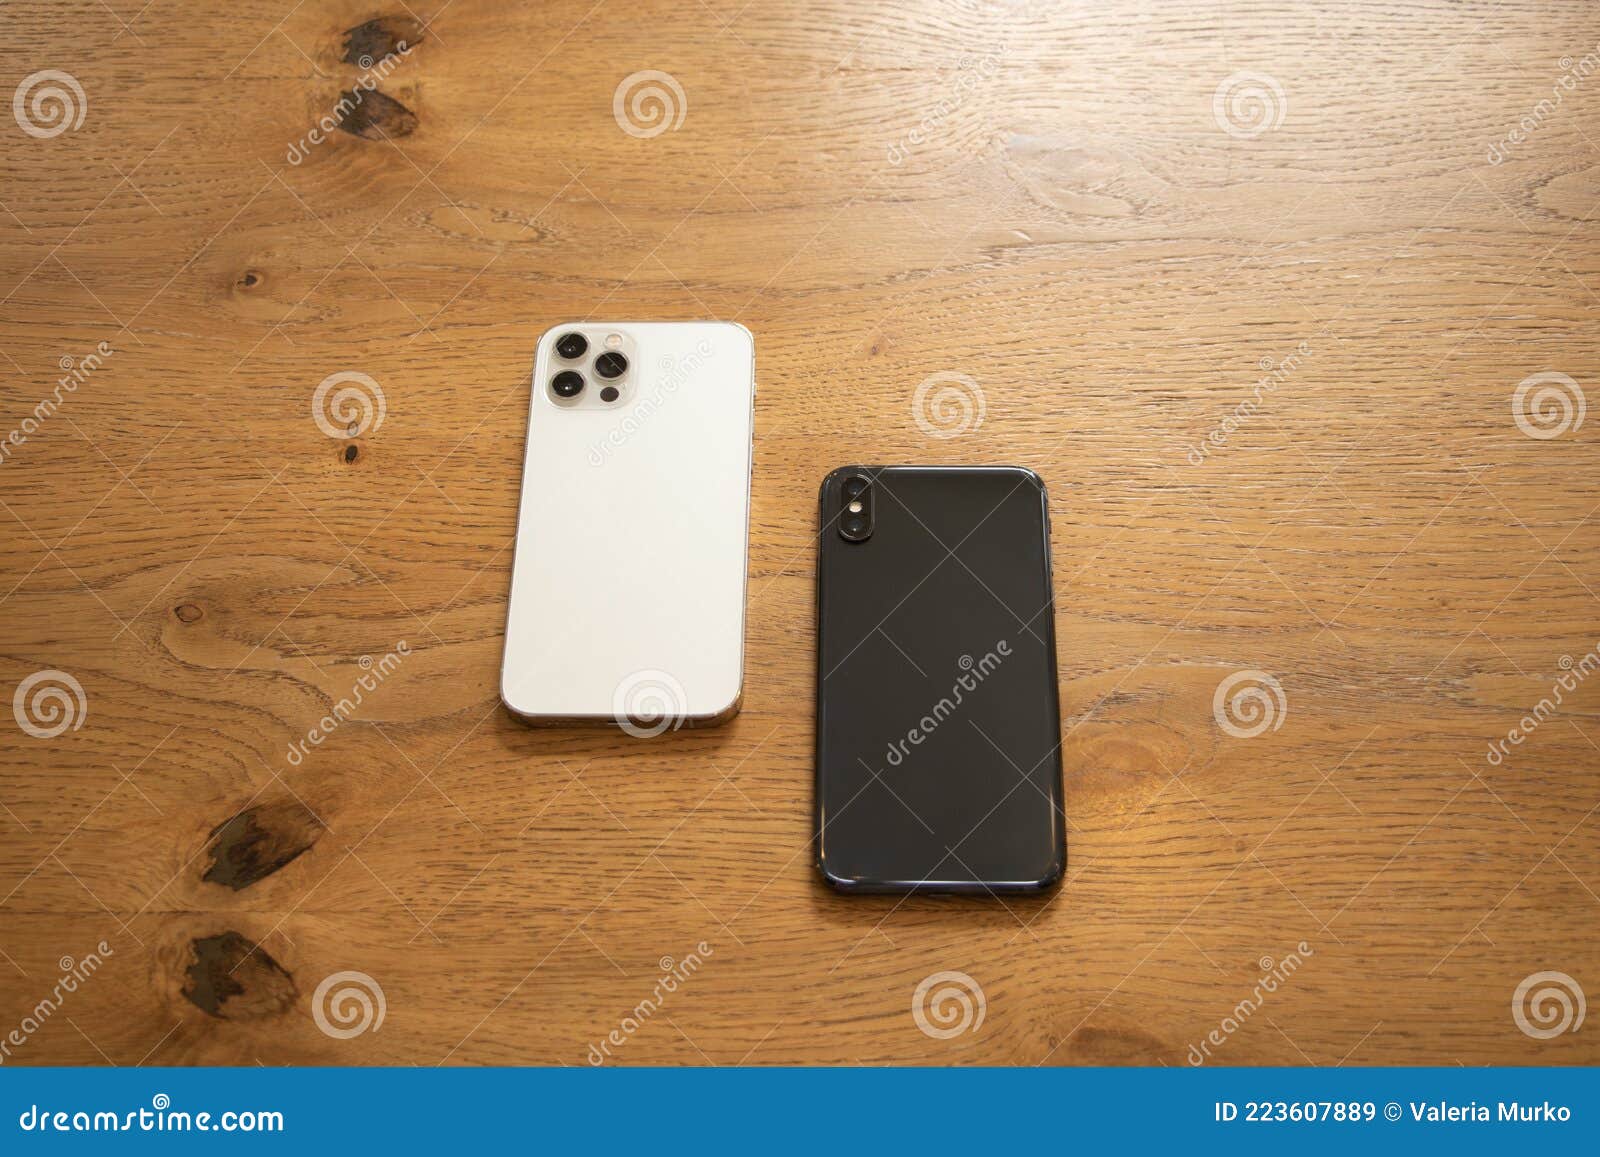 The Phone is on the Table. Black and White Phone. Background Stock Image -  Image of mobile, hold: 223607889